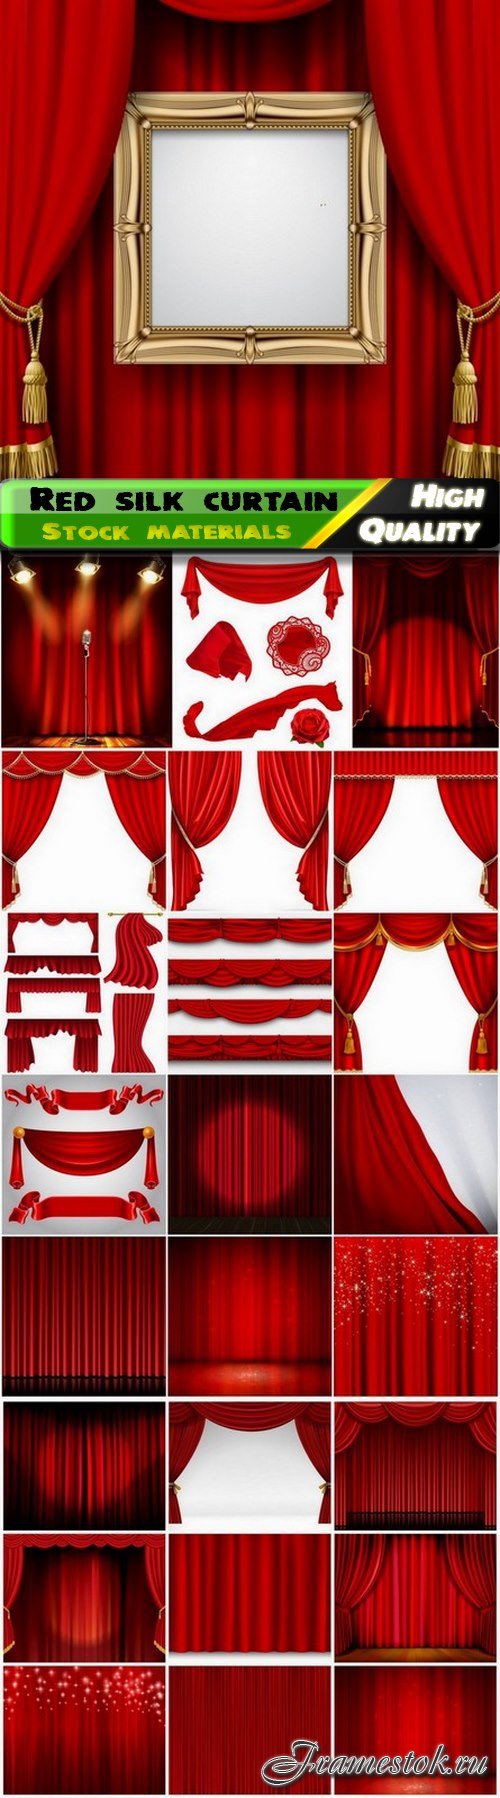 Spotlight on theater stage with red silk curtain - 25 Eps